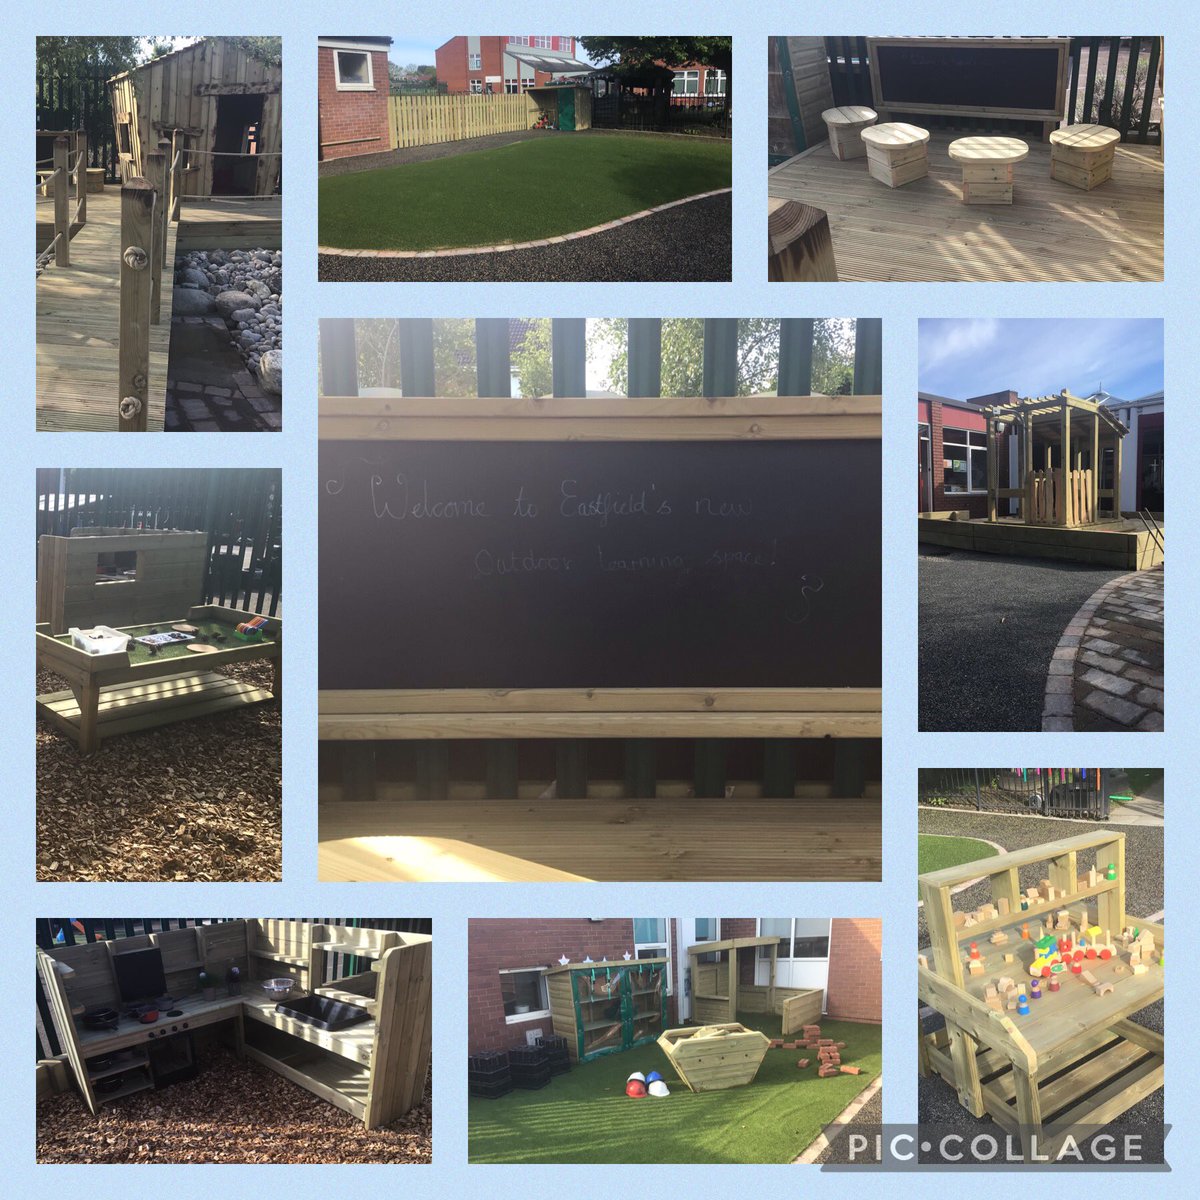 We are so excited for our children to access their new outdoor learning space today! Big thank you to @NewbyLeisureLtd for the amazing design and workmanship. #eastfieldey